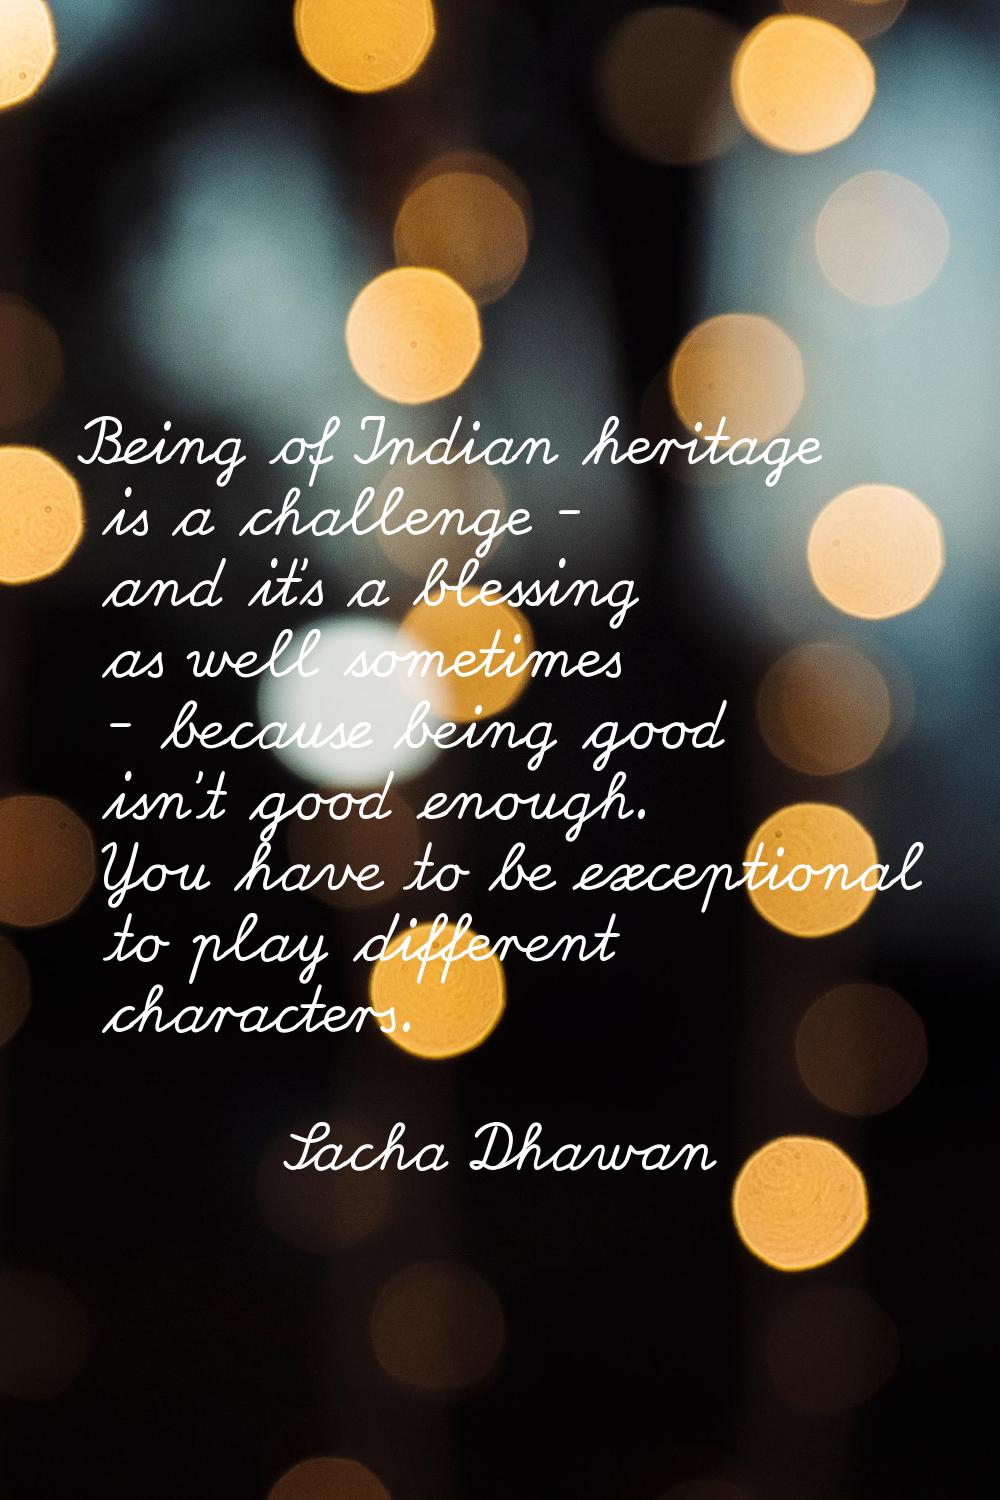 Being of Indian heritage is a challenge - and it's a blessing as well sometimes - because being goo